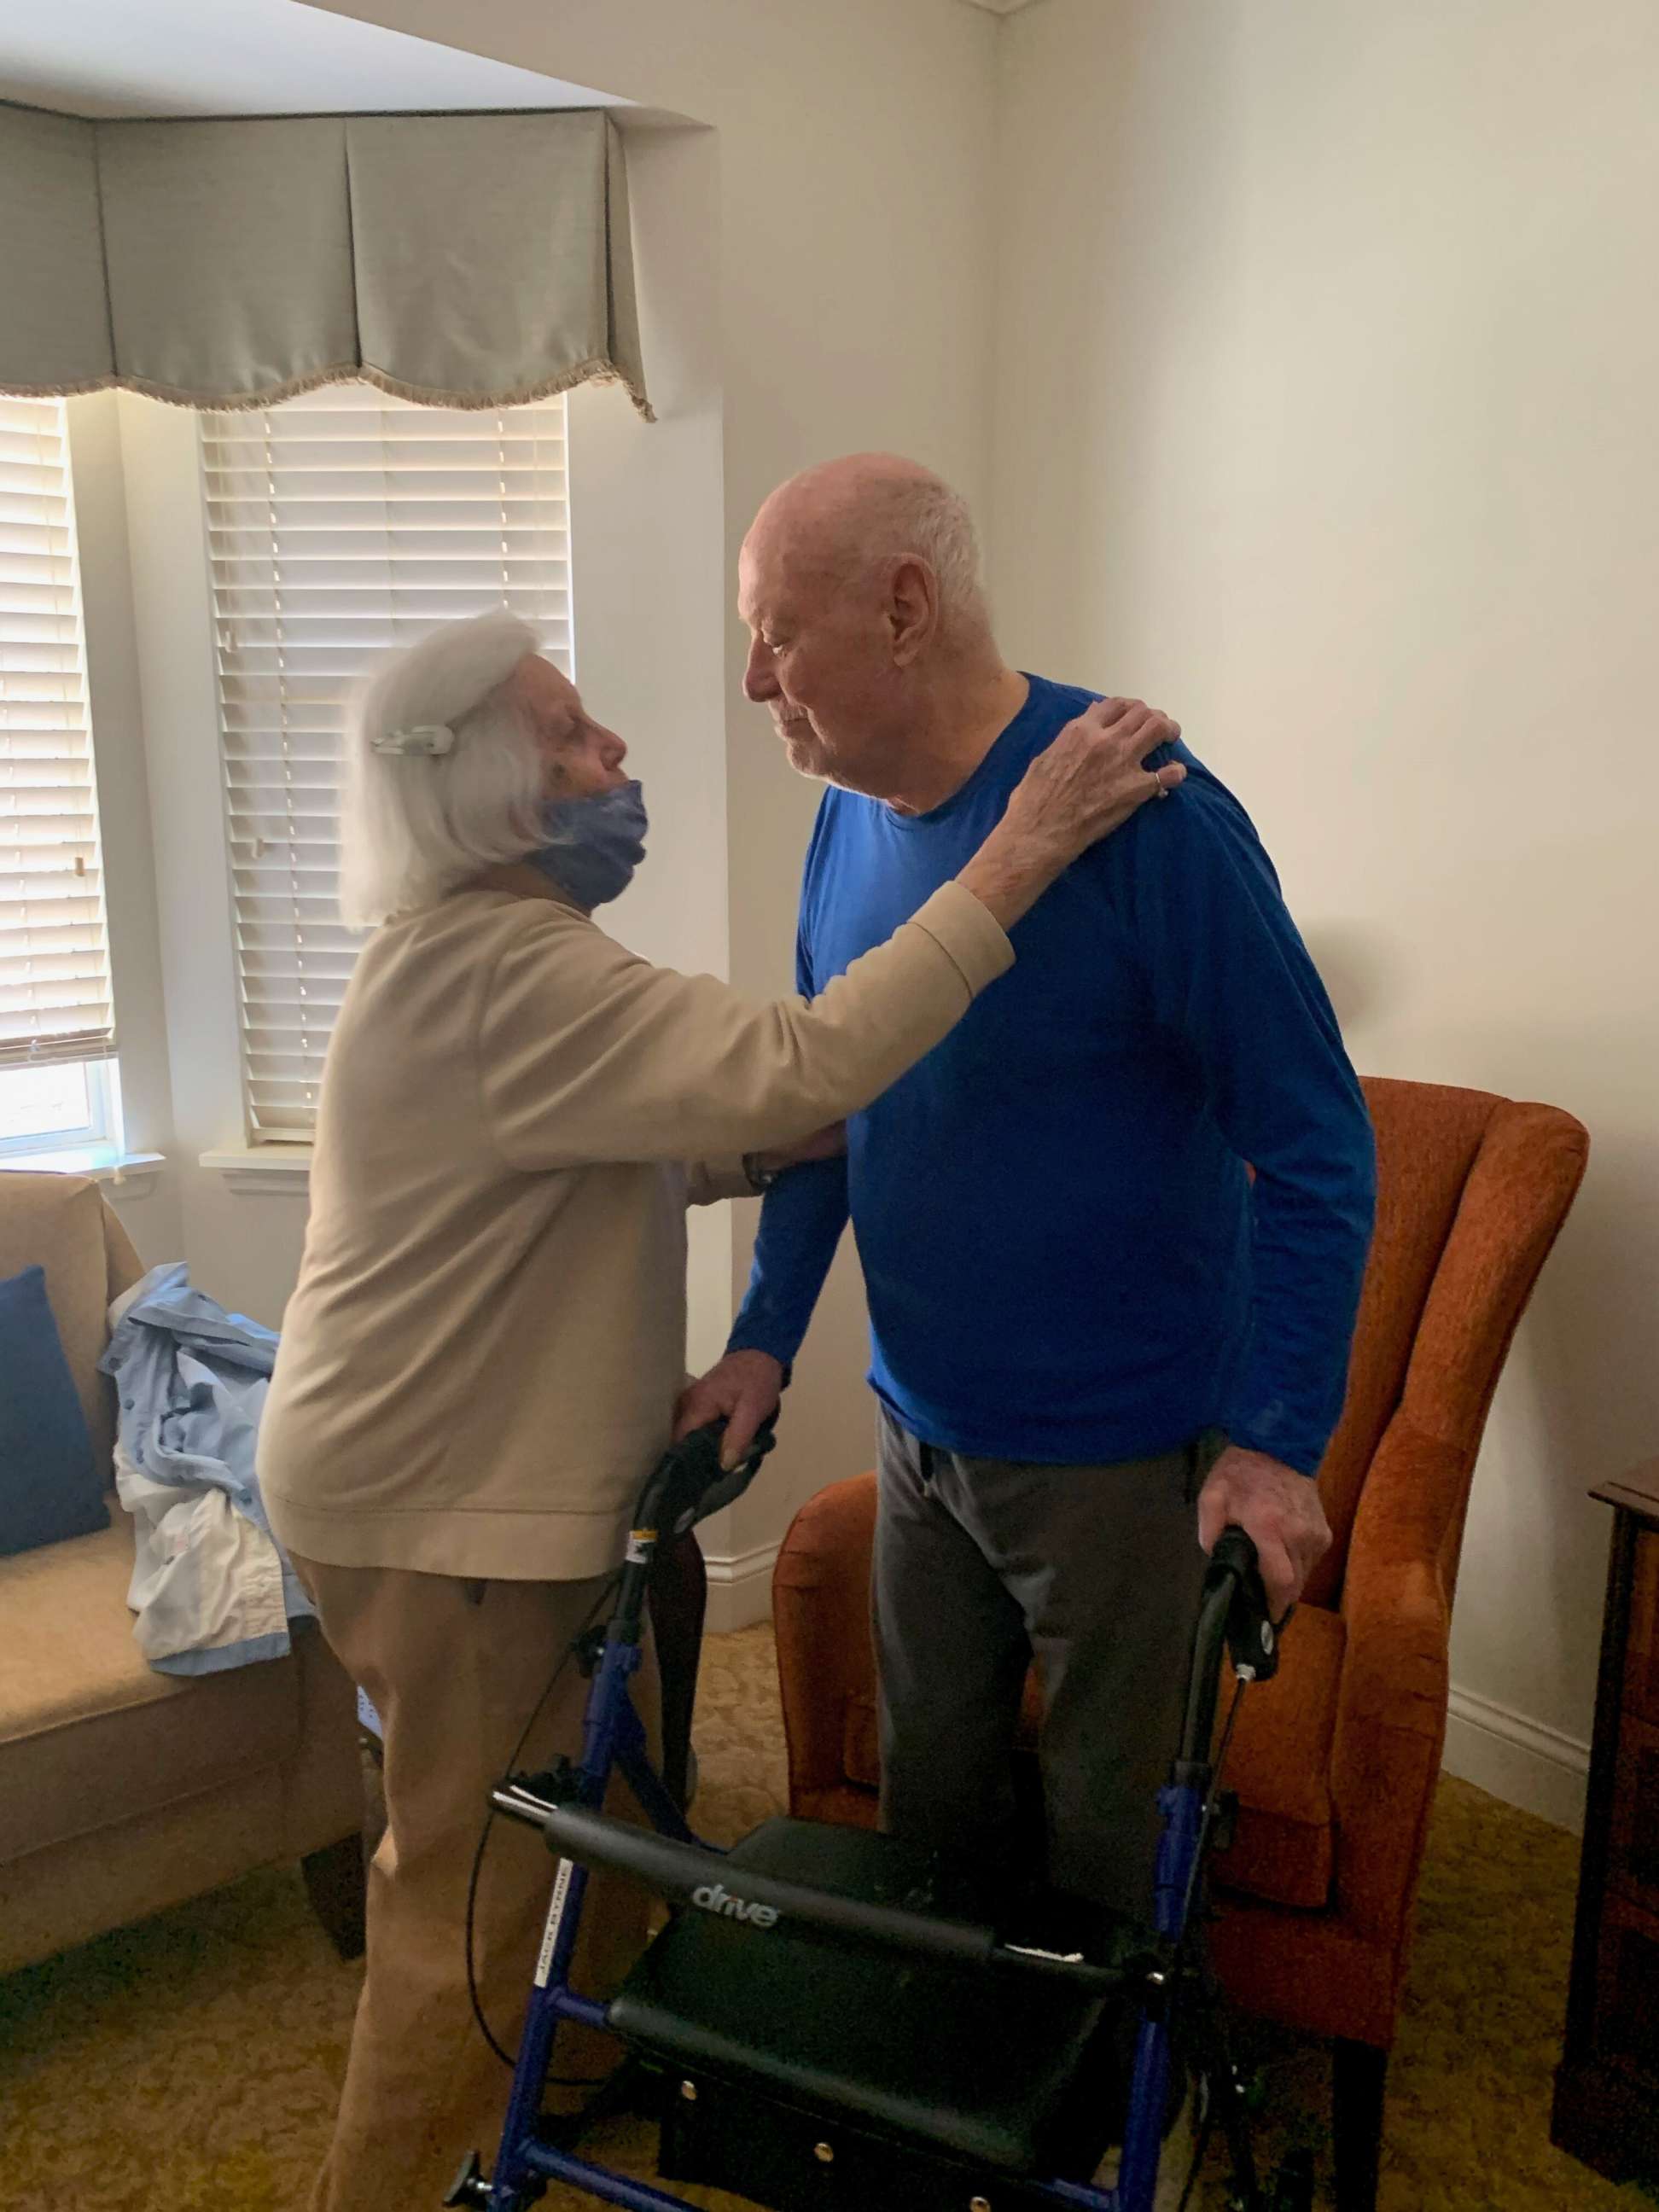 PHOTO: Virginia, 95, and Jack Byrne, 94, pictured, were able to celebrate their 72nd wedding anniversary together after spending more than a year apart.